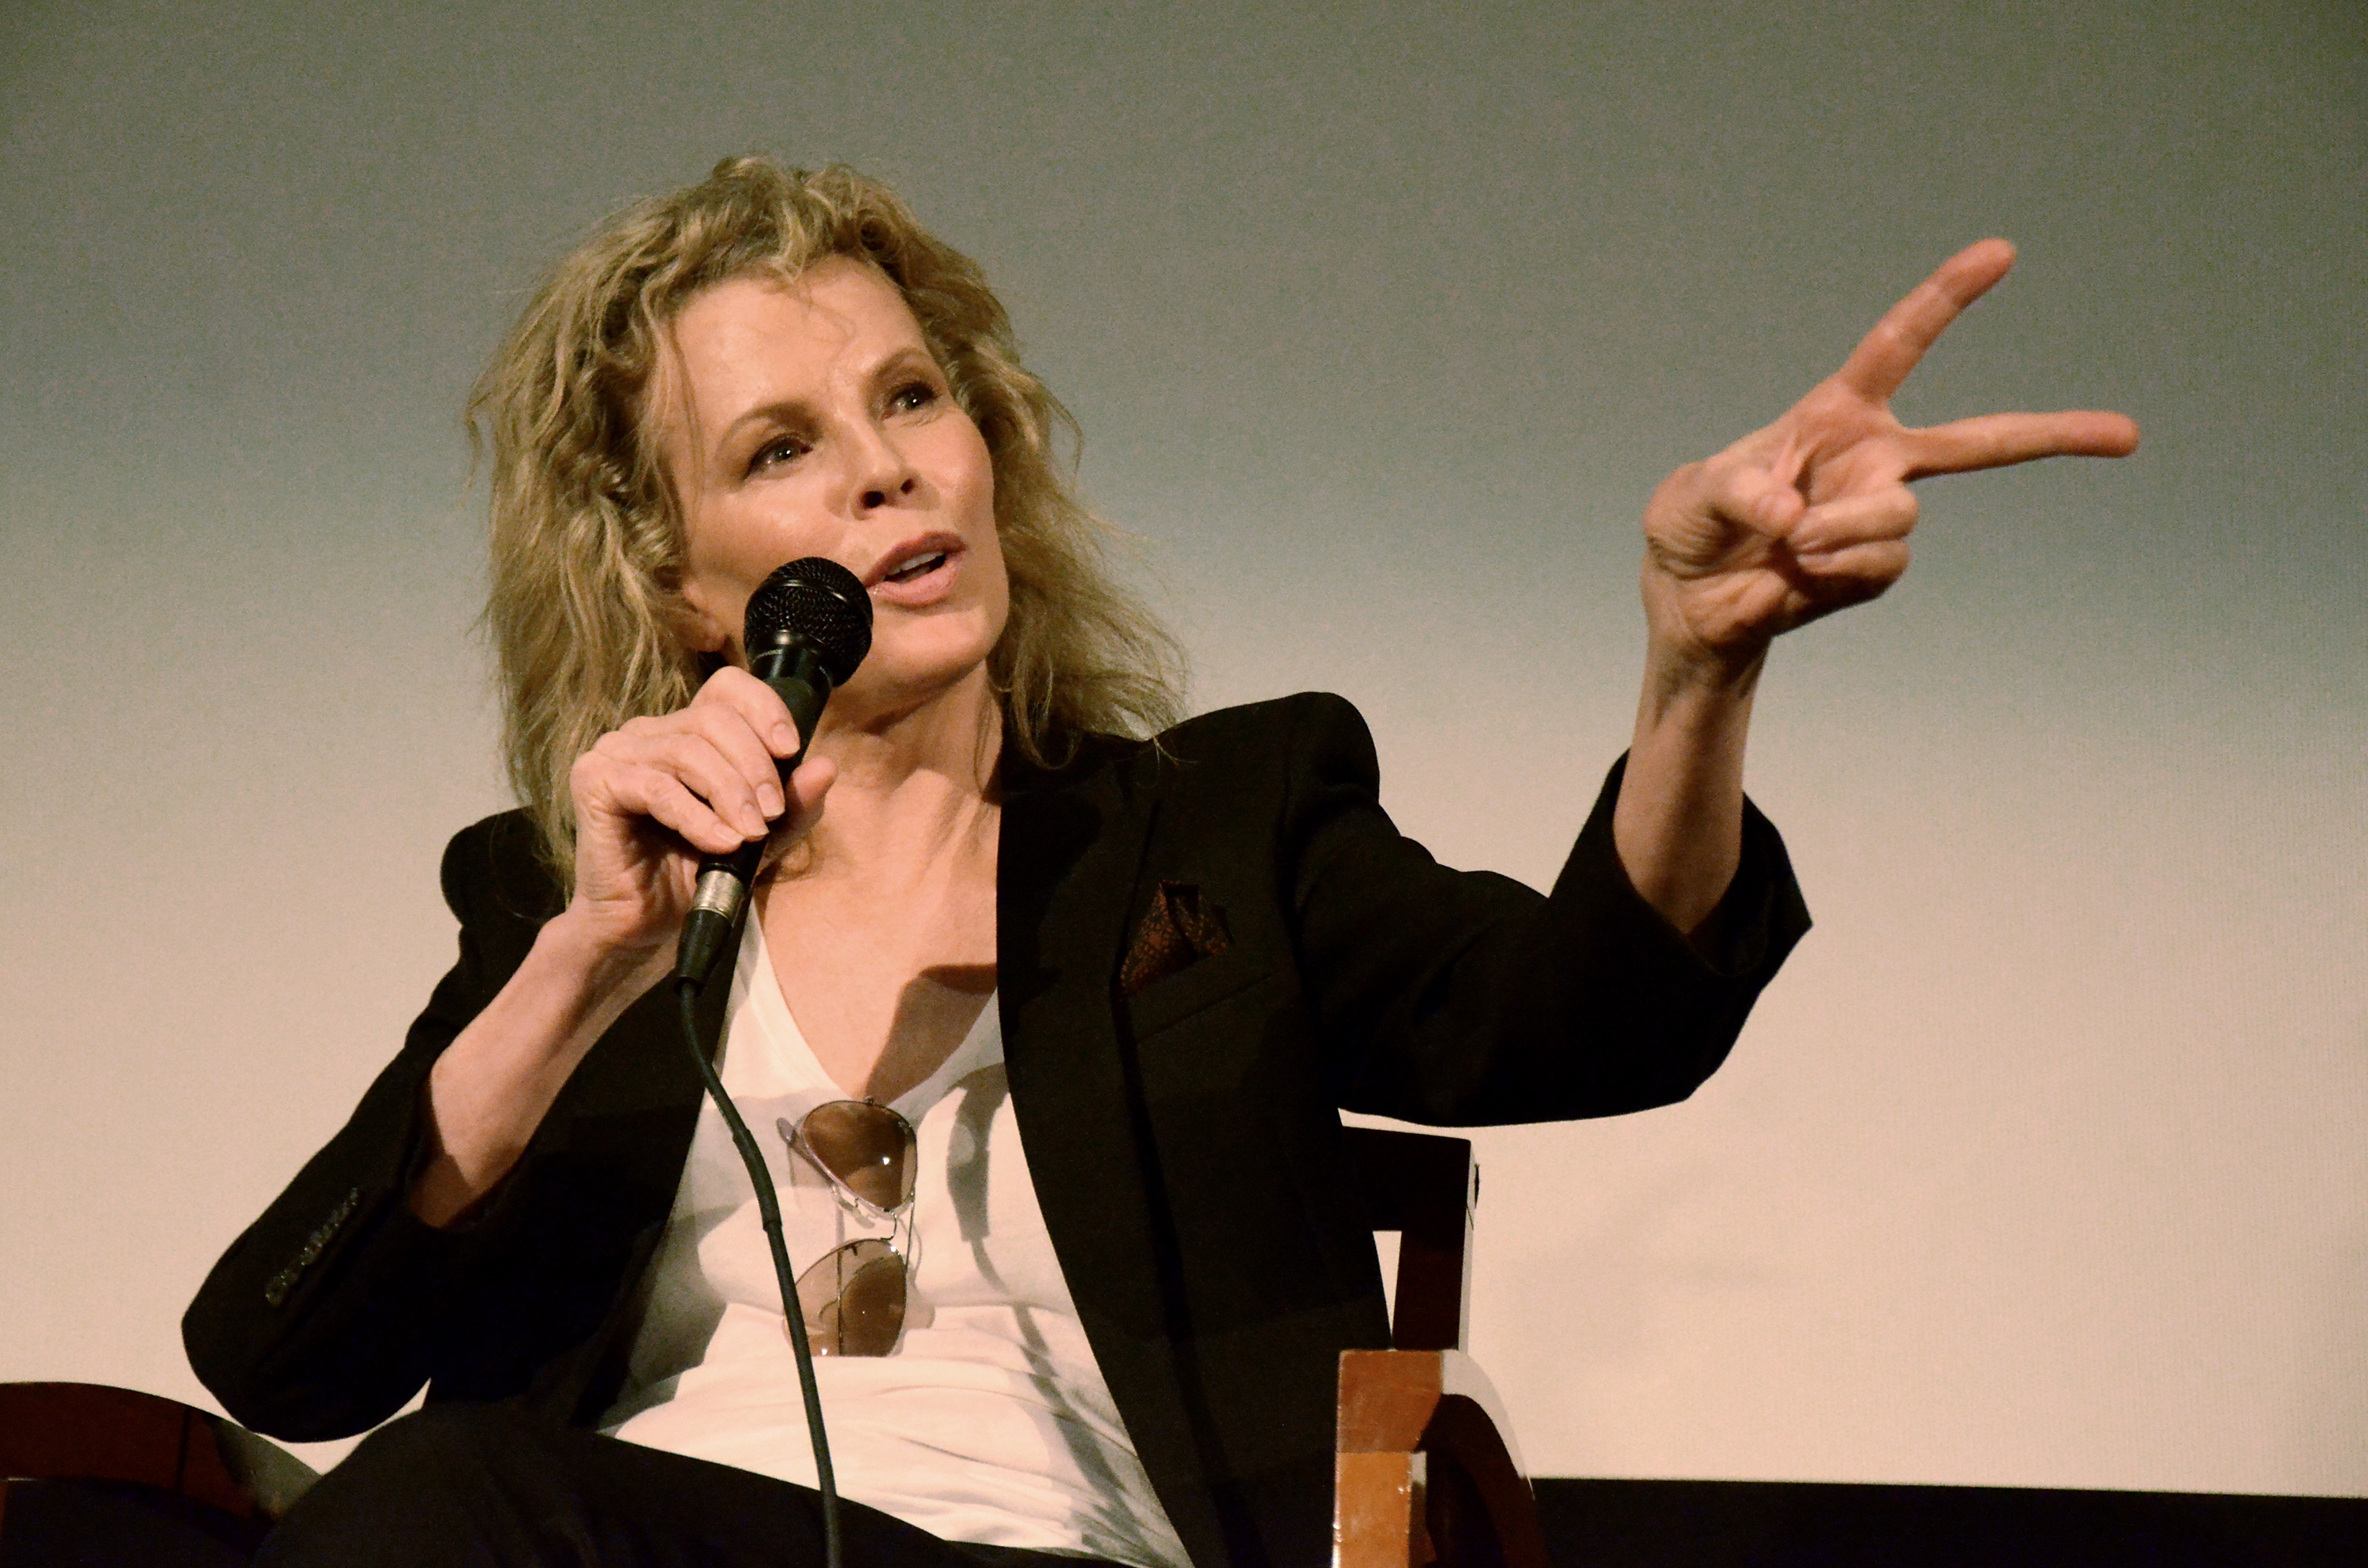 Kim Basinger at the Q&A screening of "The 11th Hour" in Santa Monica, 2015 | Source: Getty Images